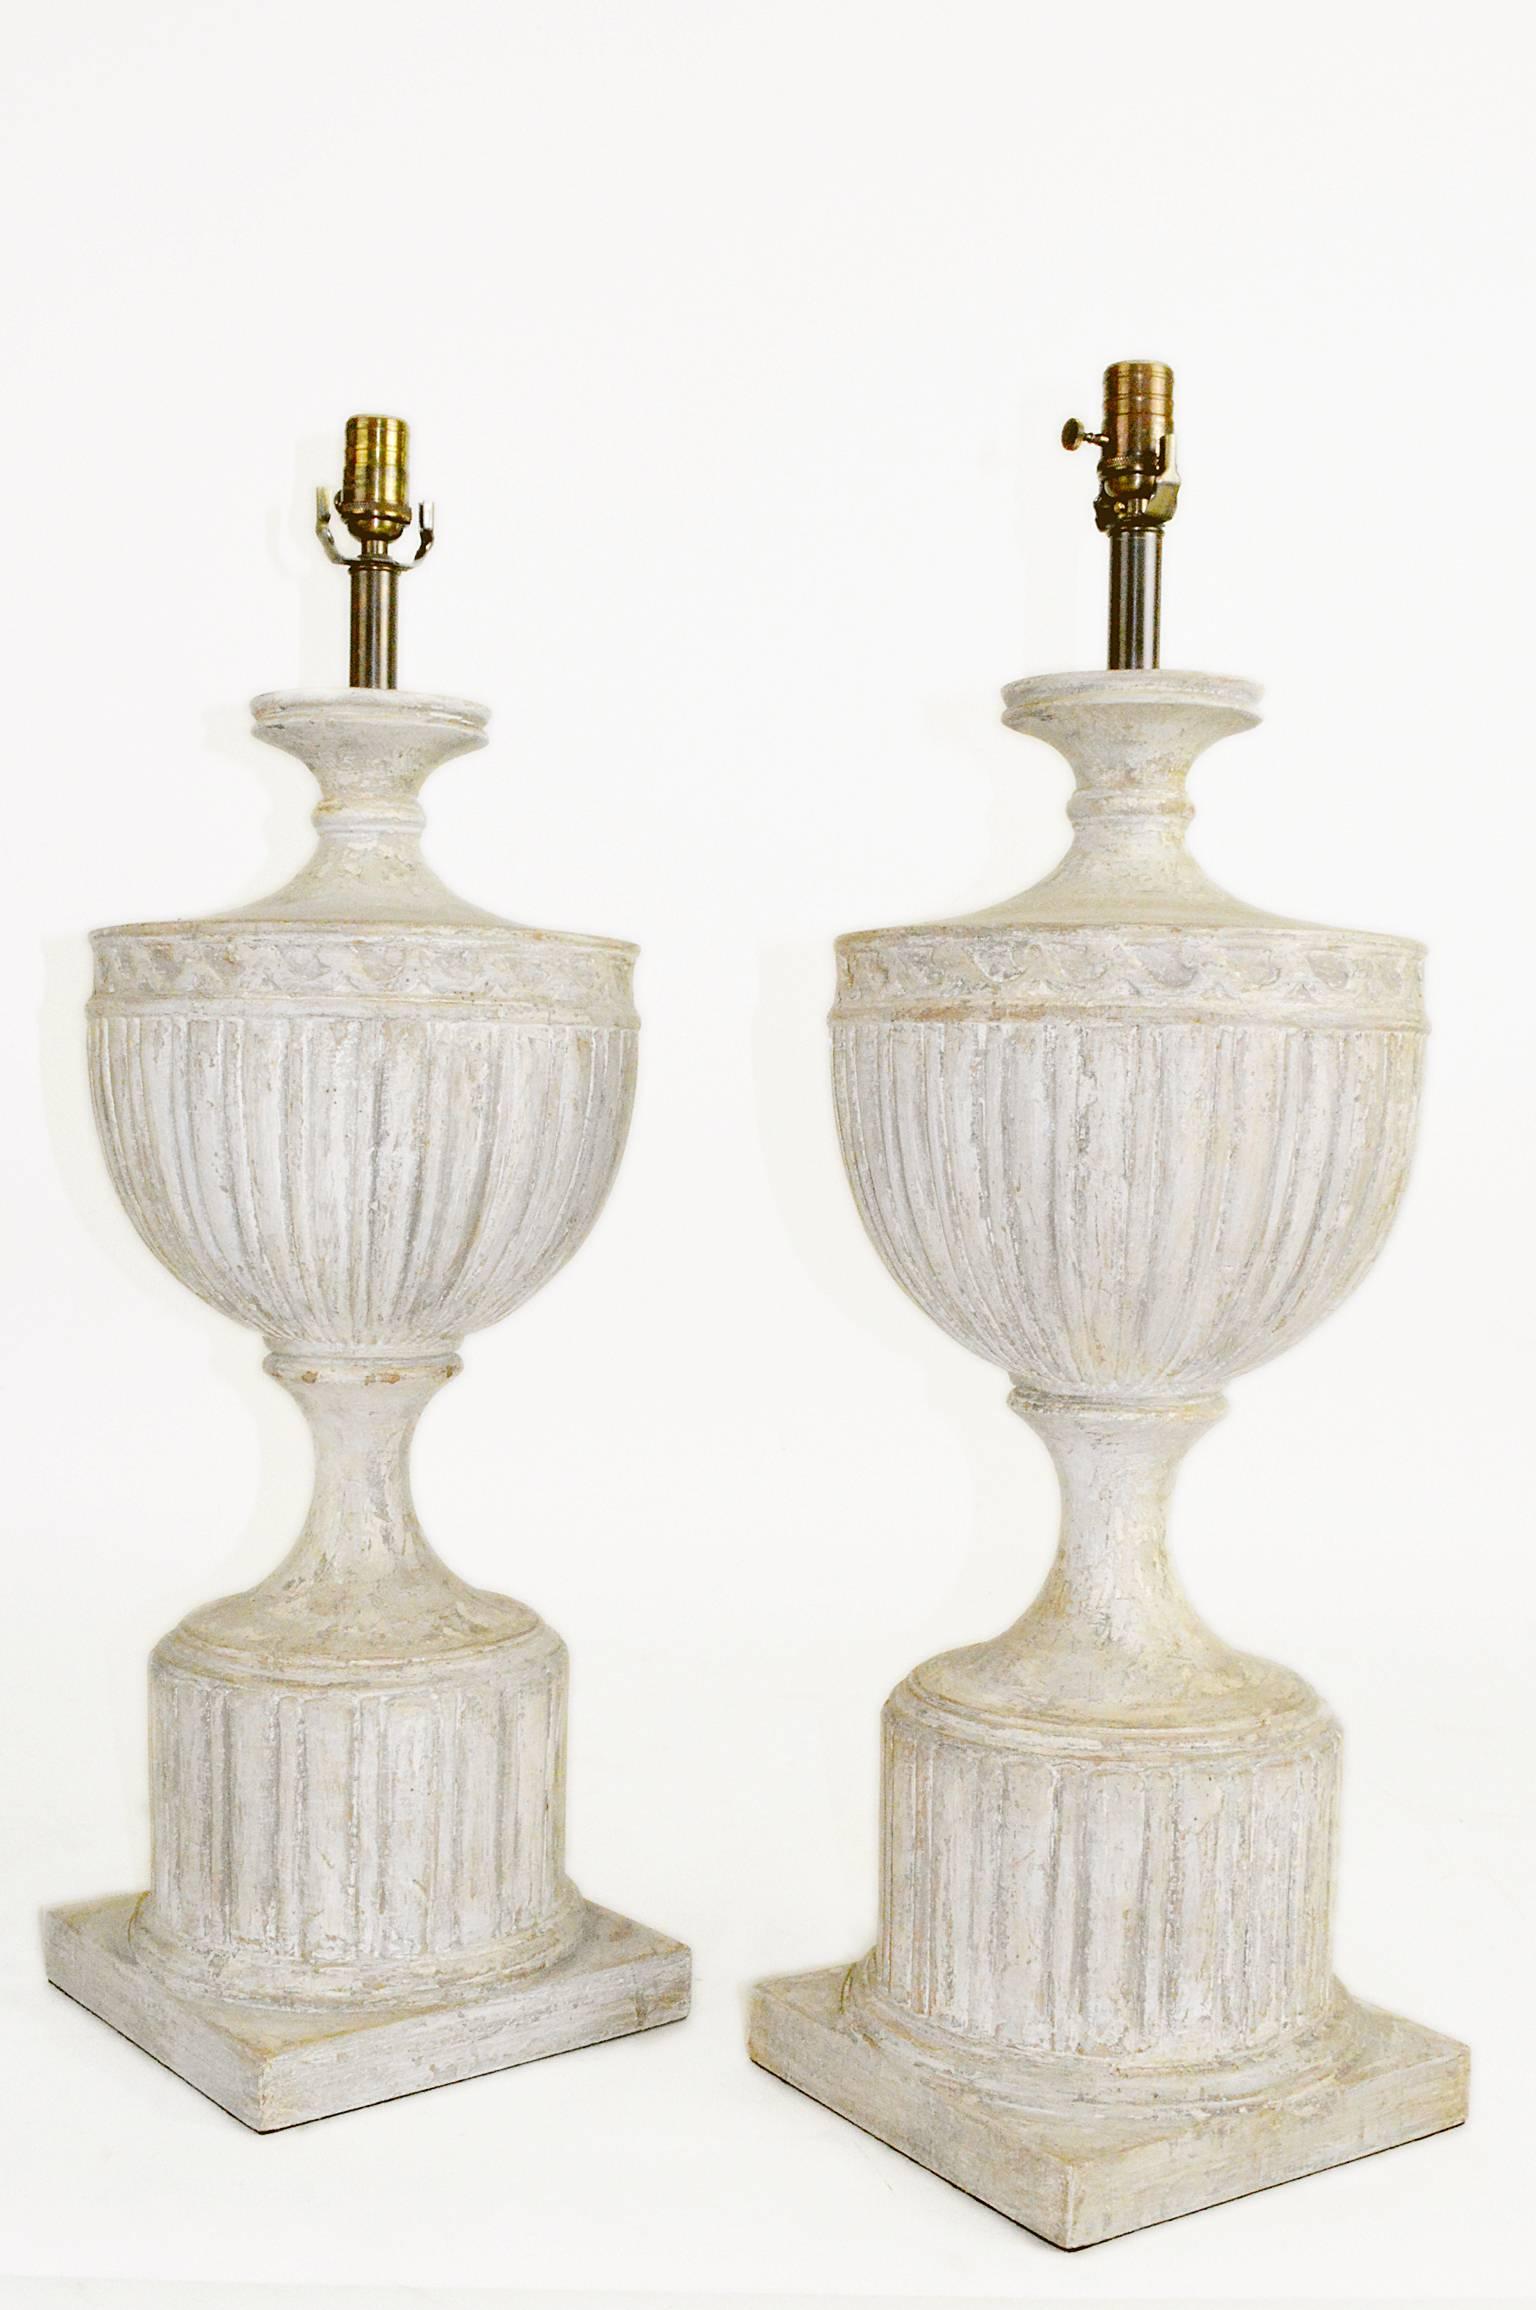 Pair of large neoclassical style urn form, carved wood table lamps with a custom distressed painted finish. 32.5